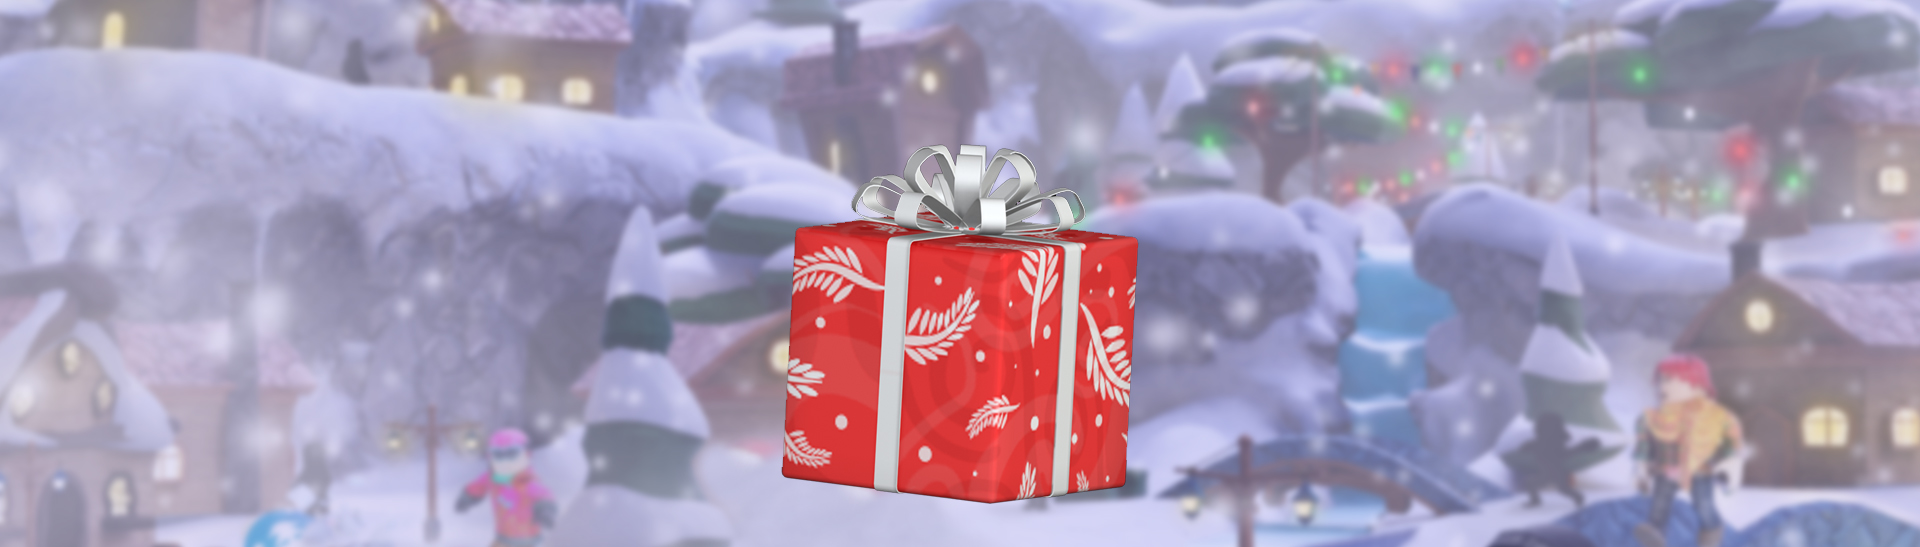 Holiday Giveaway 2017 Roblox Blog - roblox gifts 2017